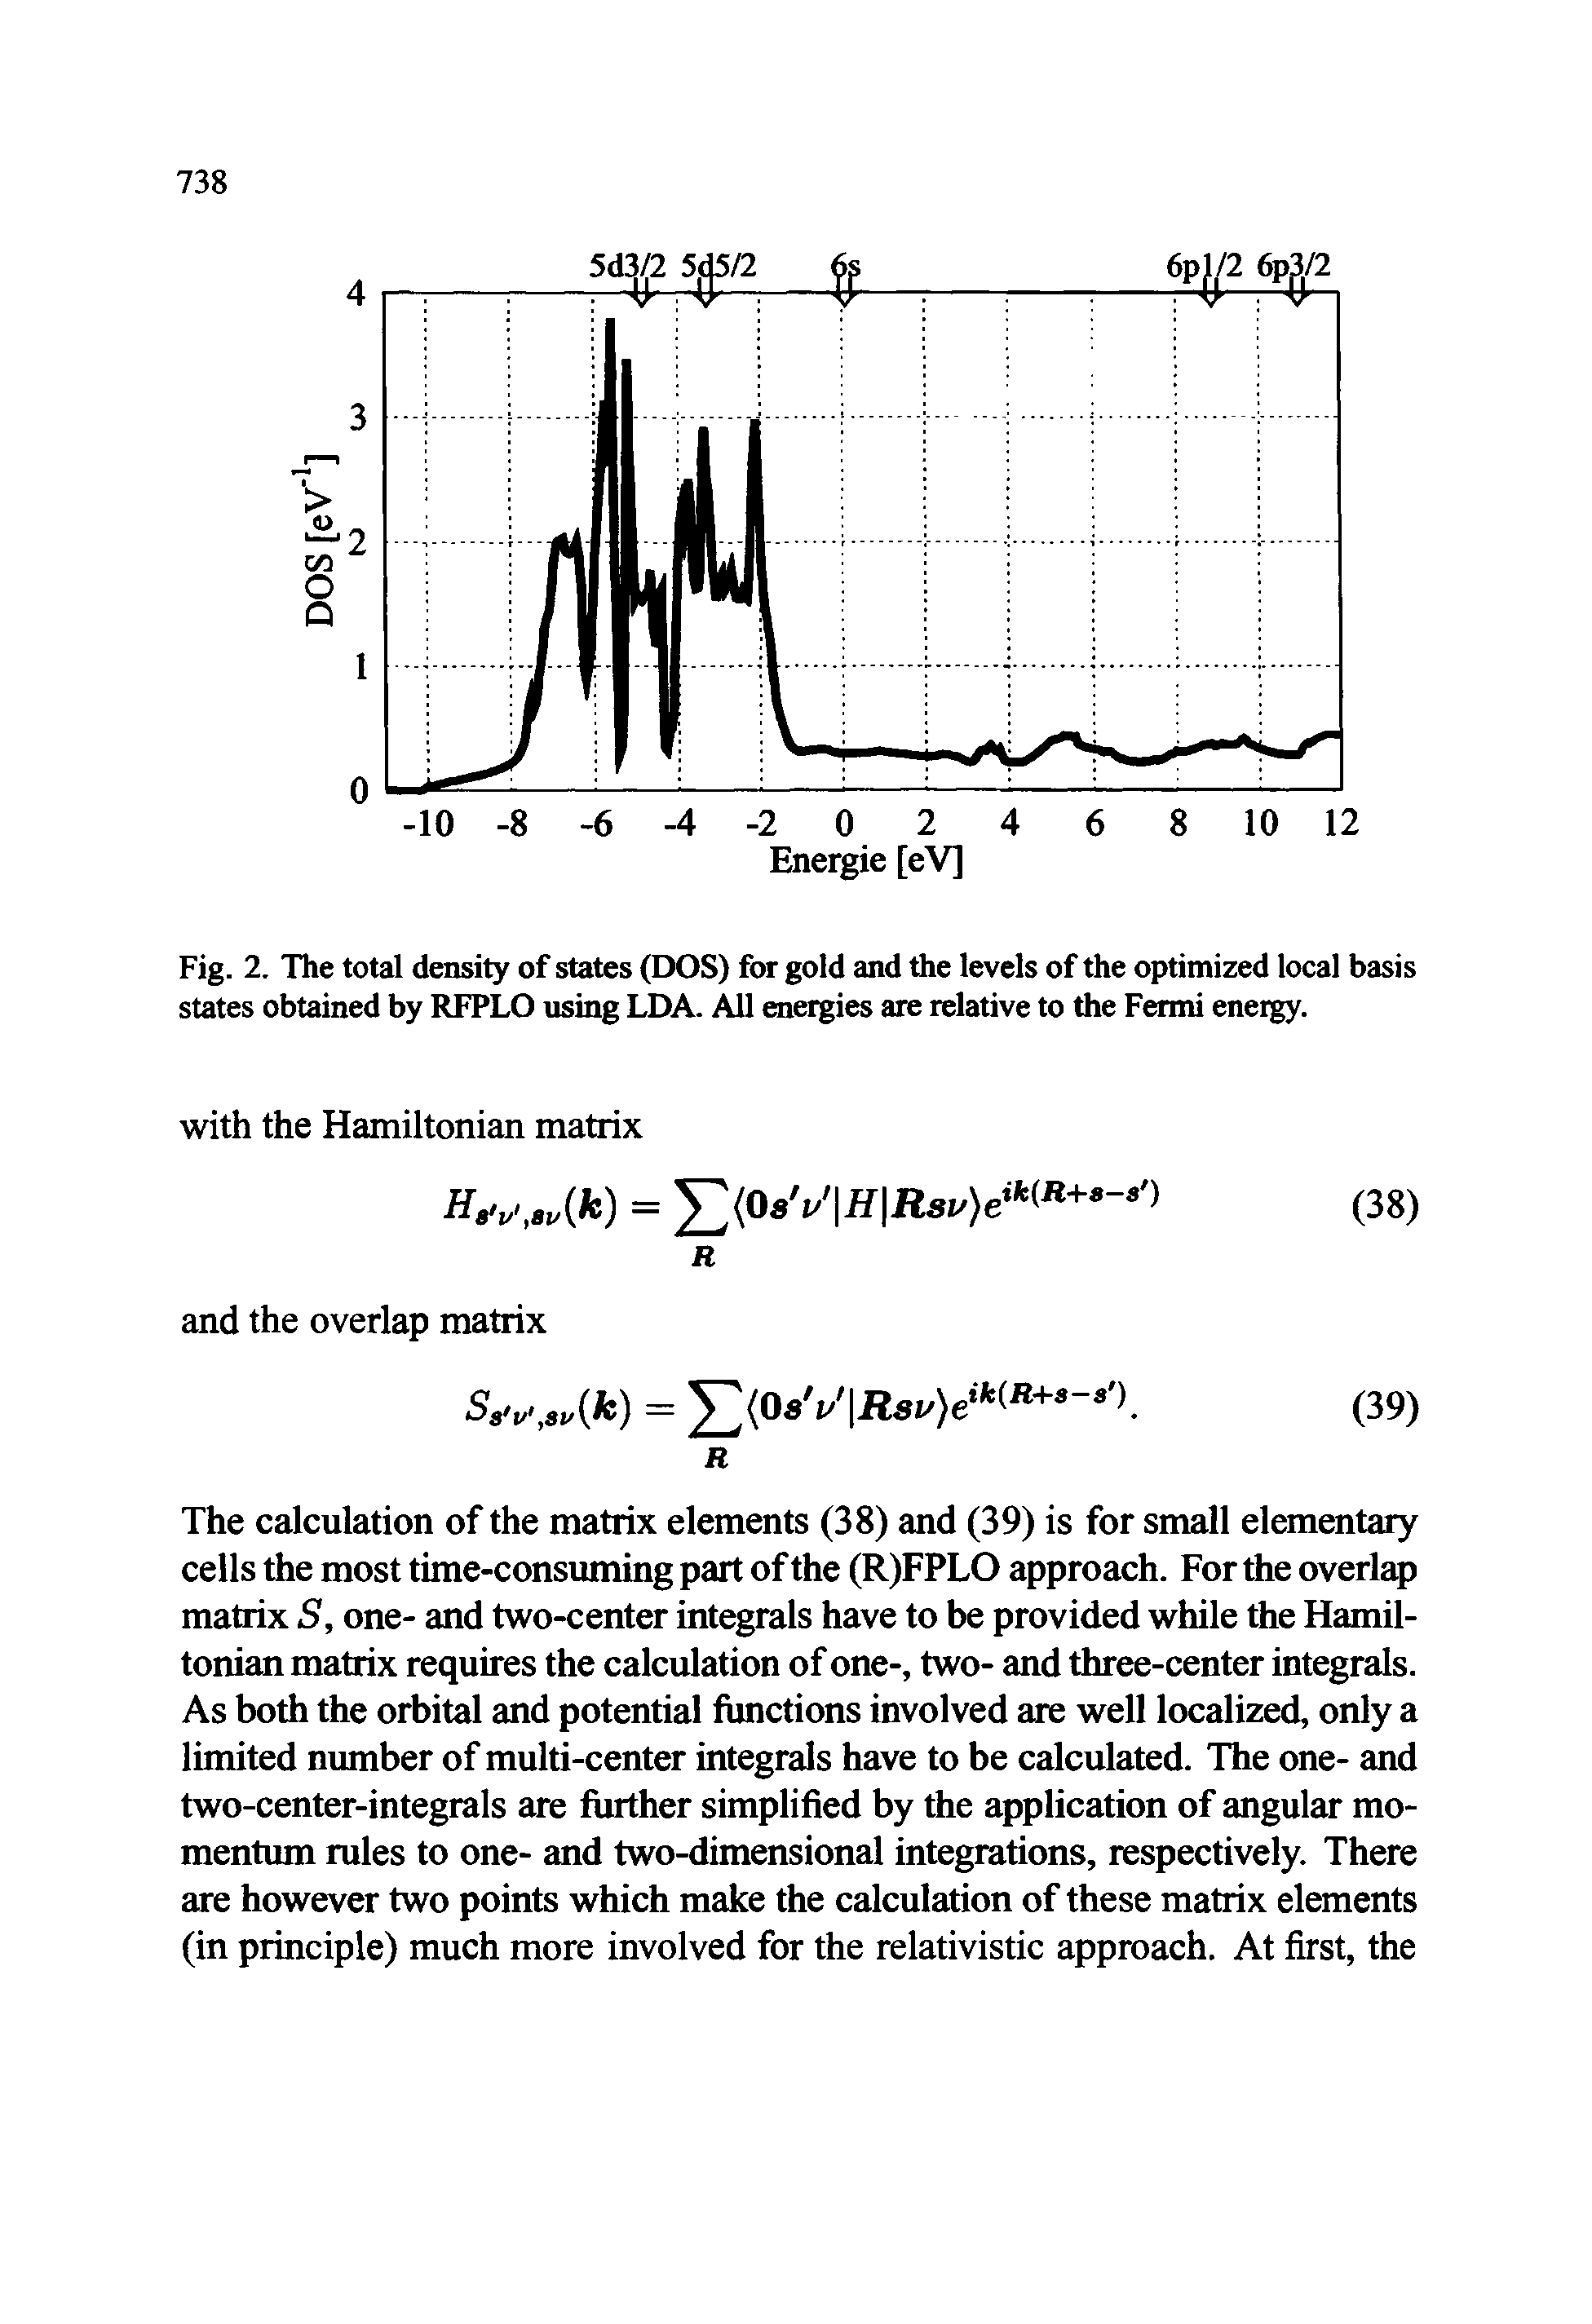 Fig. 2. The total density of states (DOS) for gold and the levels of the optimized local basis states obtained by RFPLO using LDA. All energies are relative to the Fermi energy.